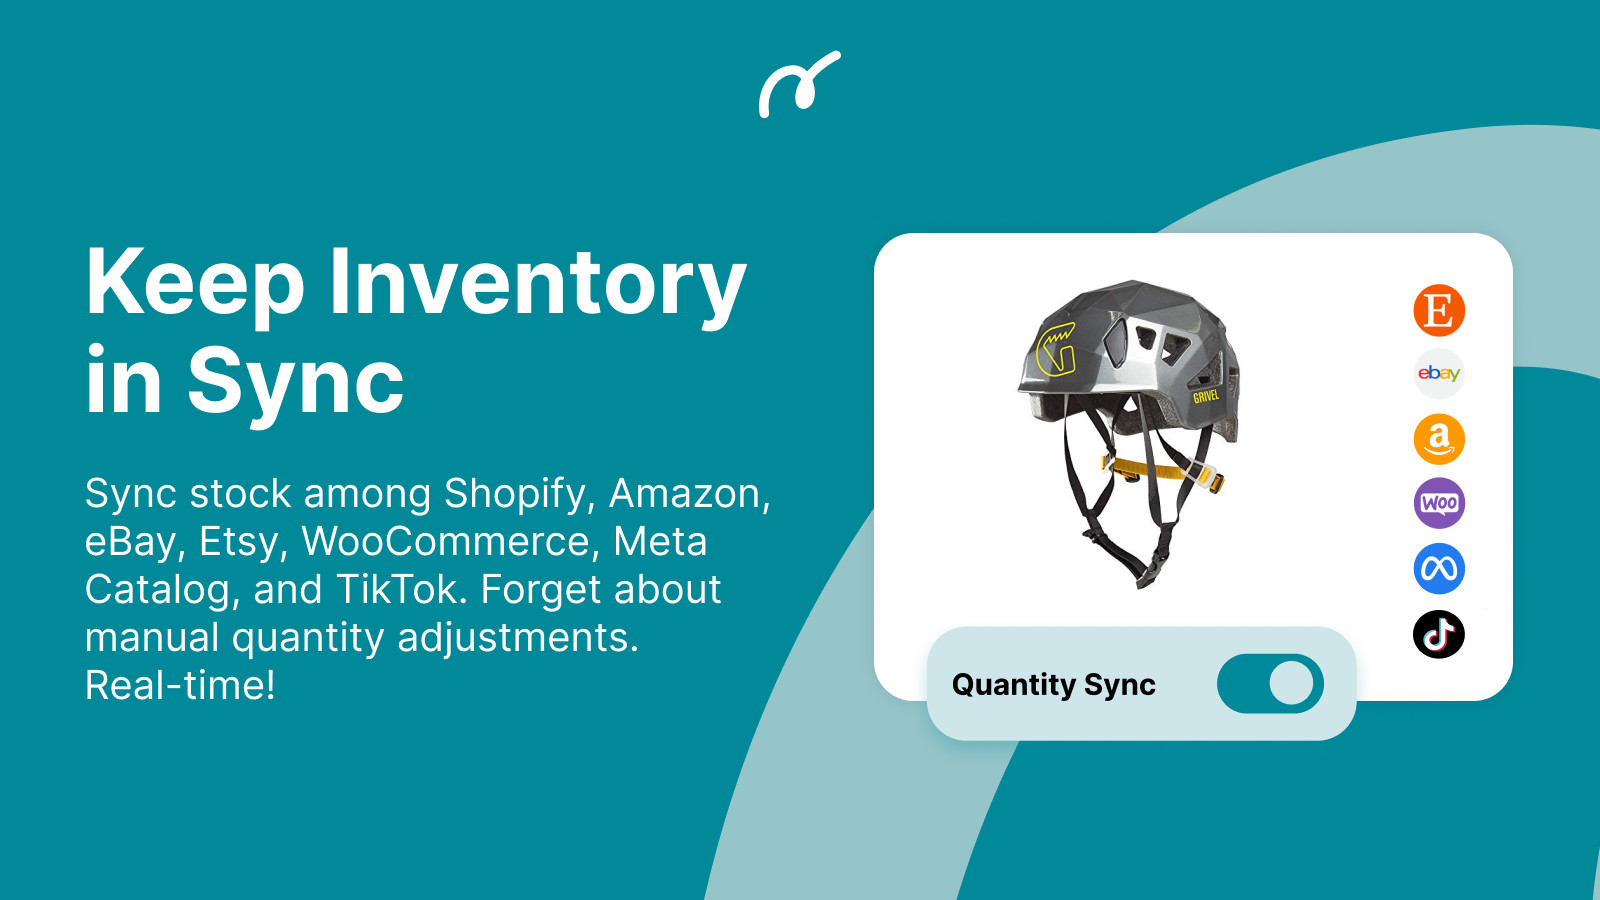 Sync inventory stock count across Shopify and marketplaces